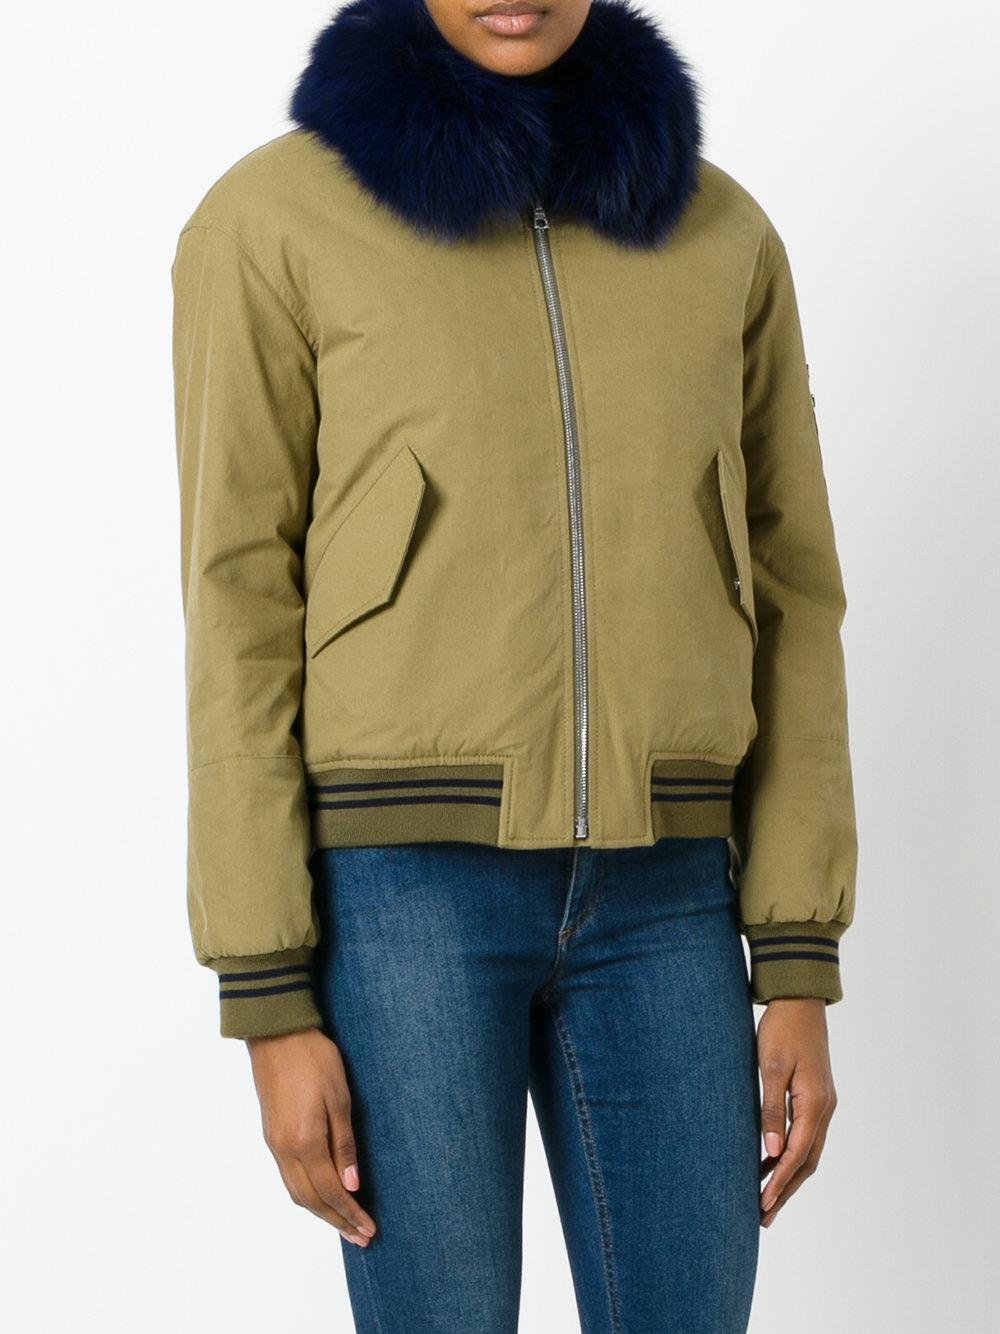 Army by Yves Salomon Bomber Jacket in Green - Lyst